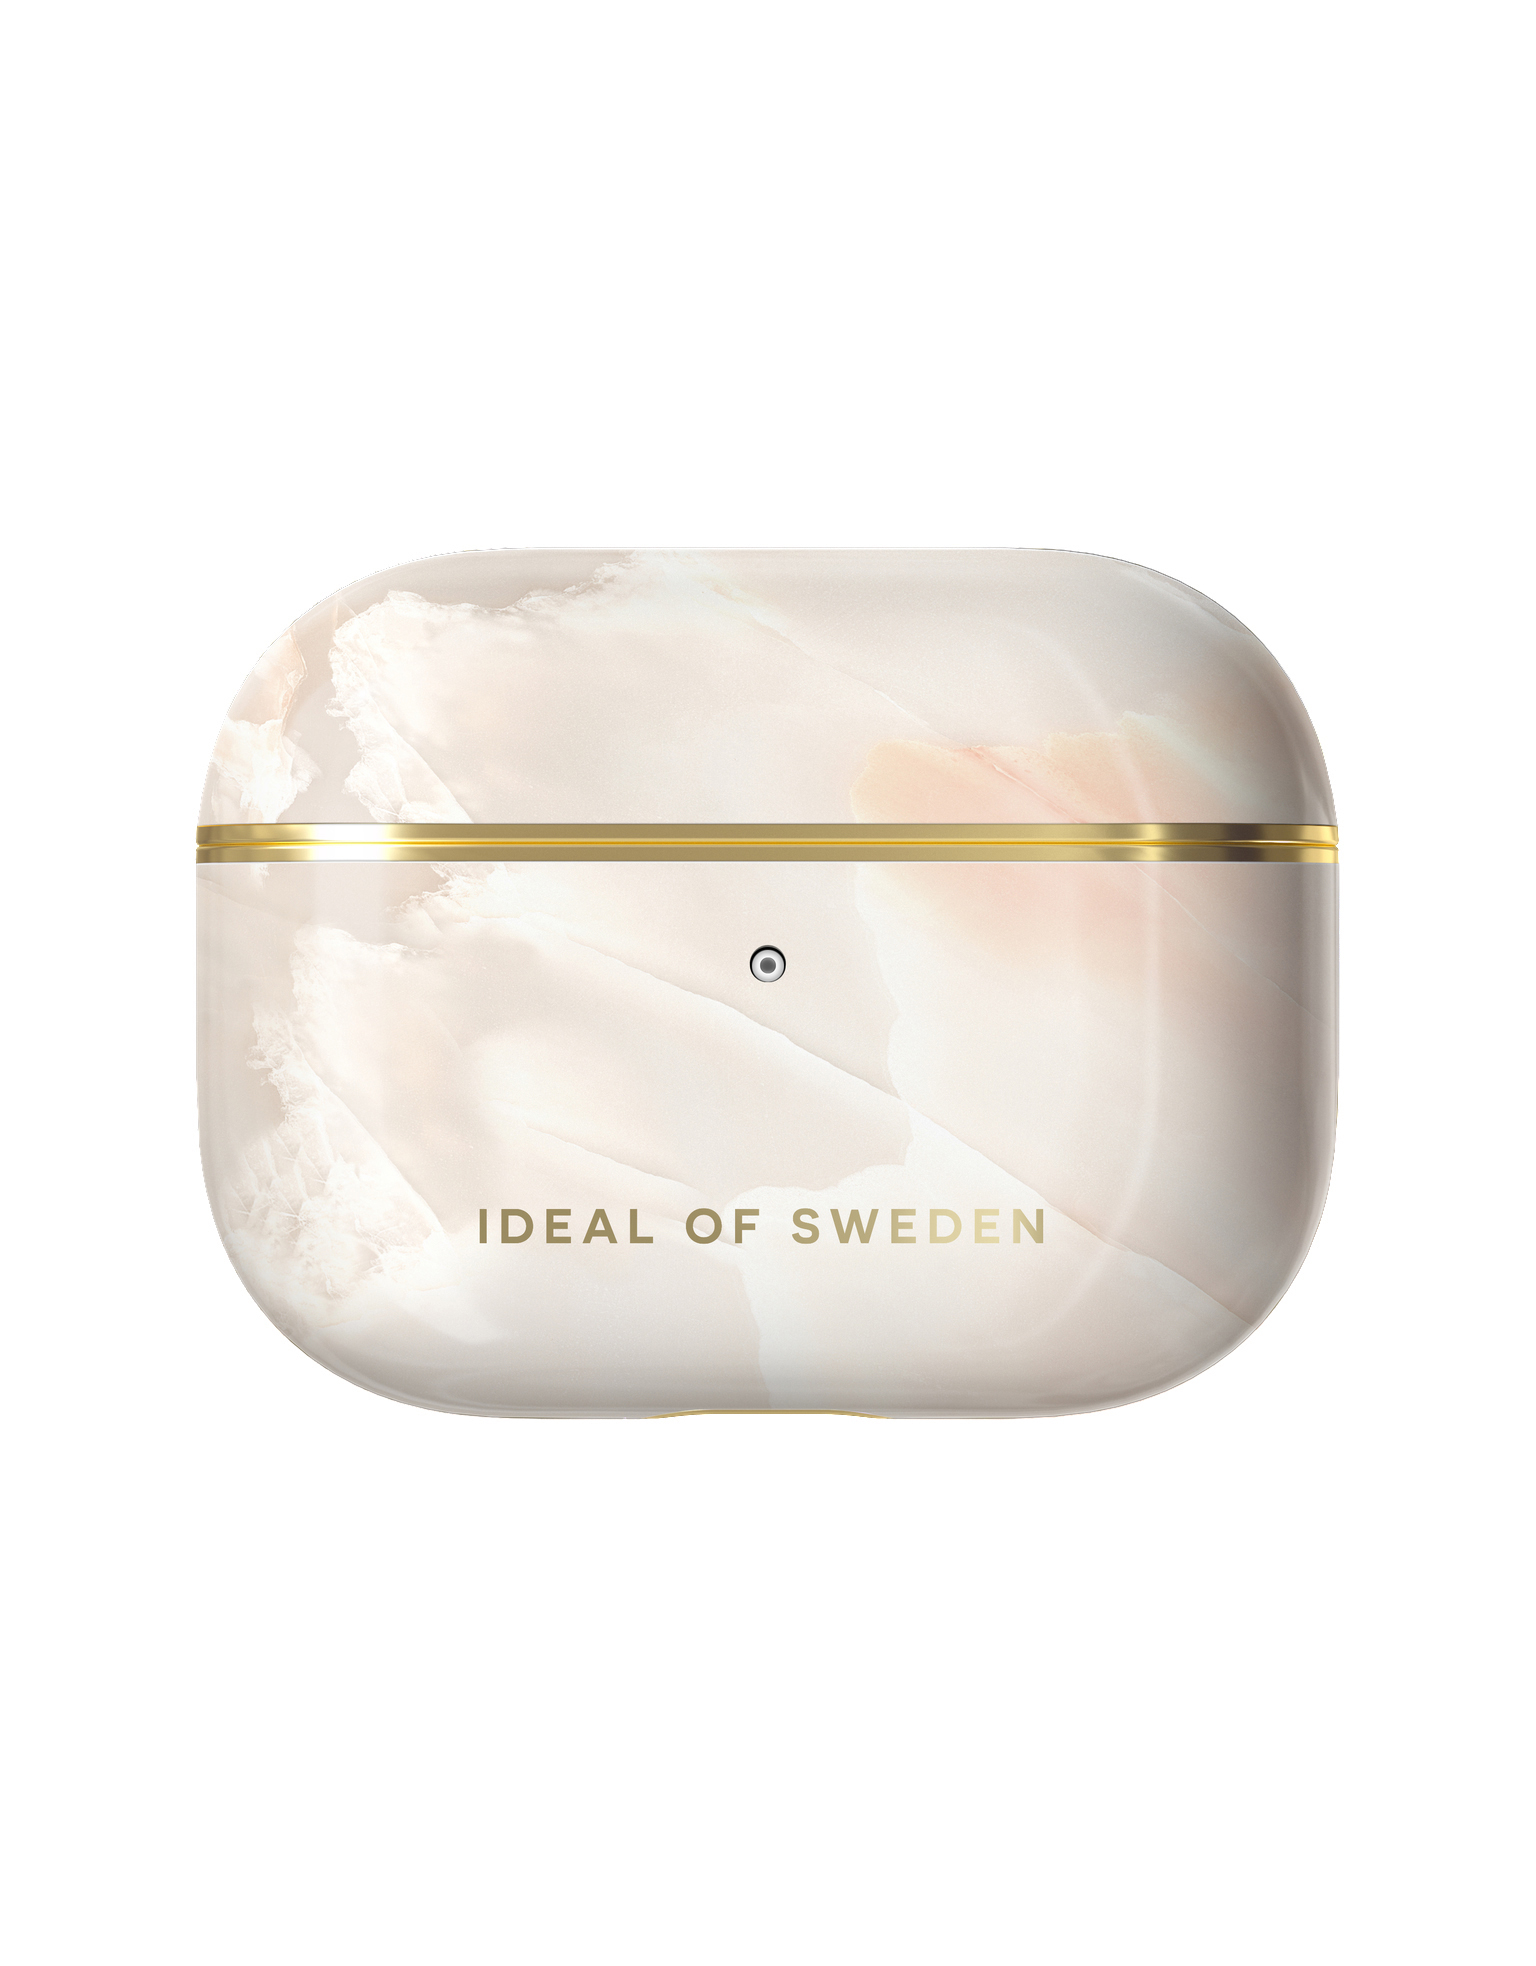 SWEDEN OF Case IDEAL Rose Marble Pro Schutzhülle Pearl Airpods